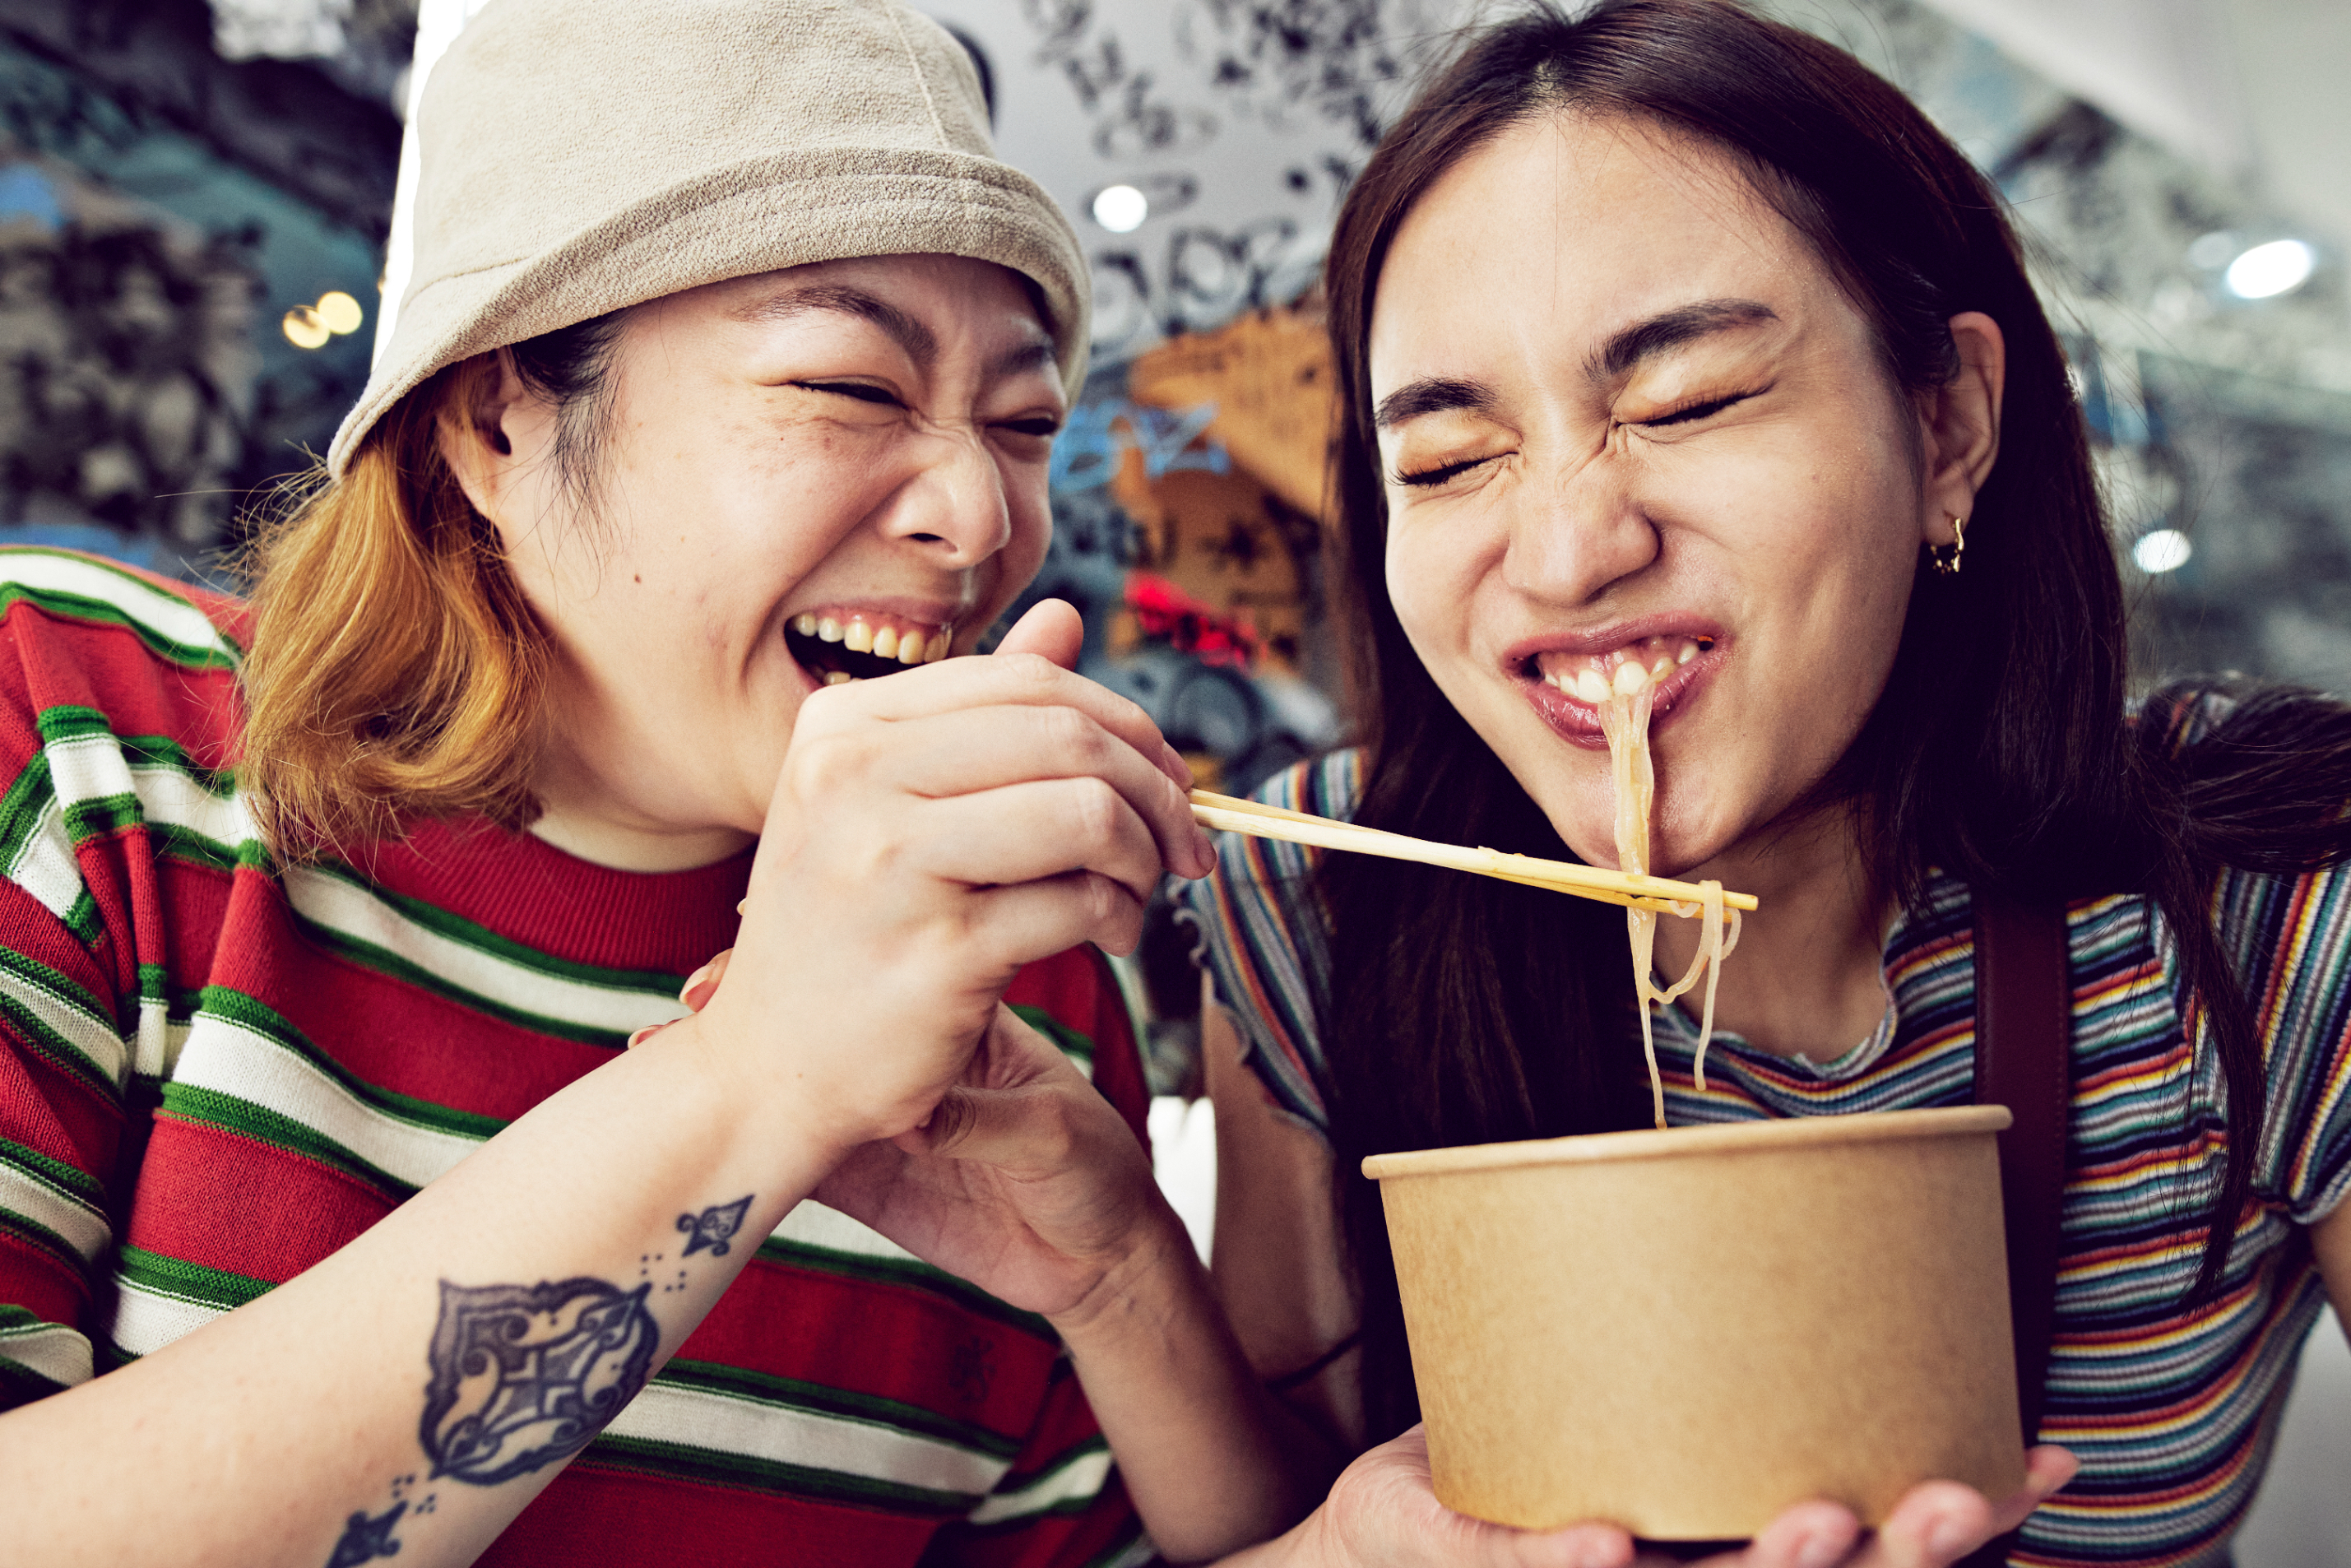 Two people are sharing a laugh while eating noodles from a takeout container